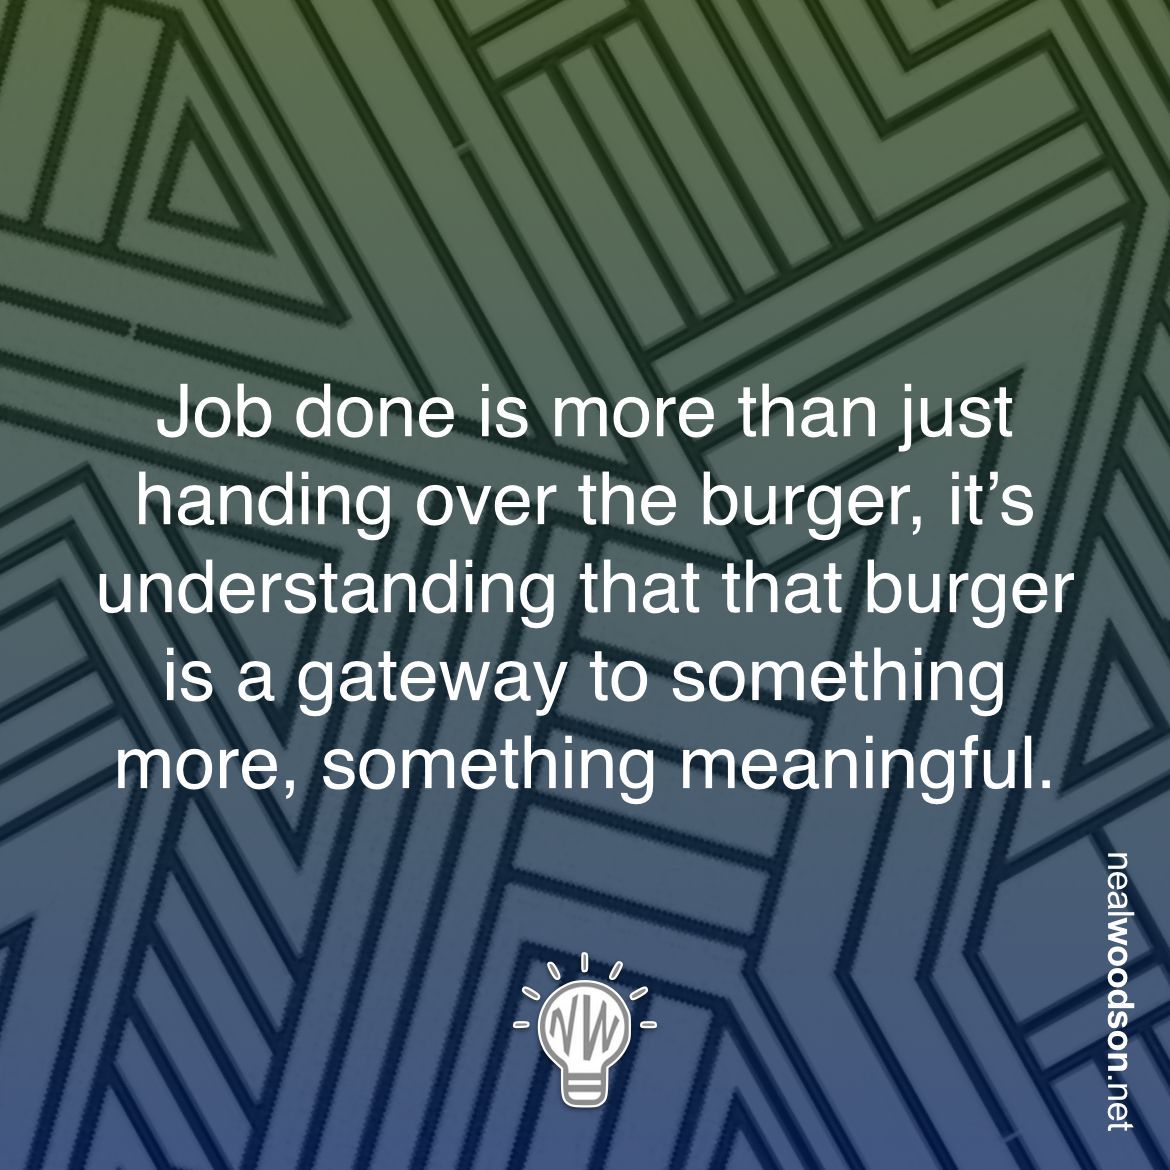 Job done is more than just handing over the burger, it’s understanding that that burger is a gateway to something more, something meaningful.
#hospitality #humanexperience #customerexperience